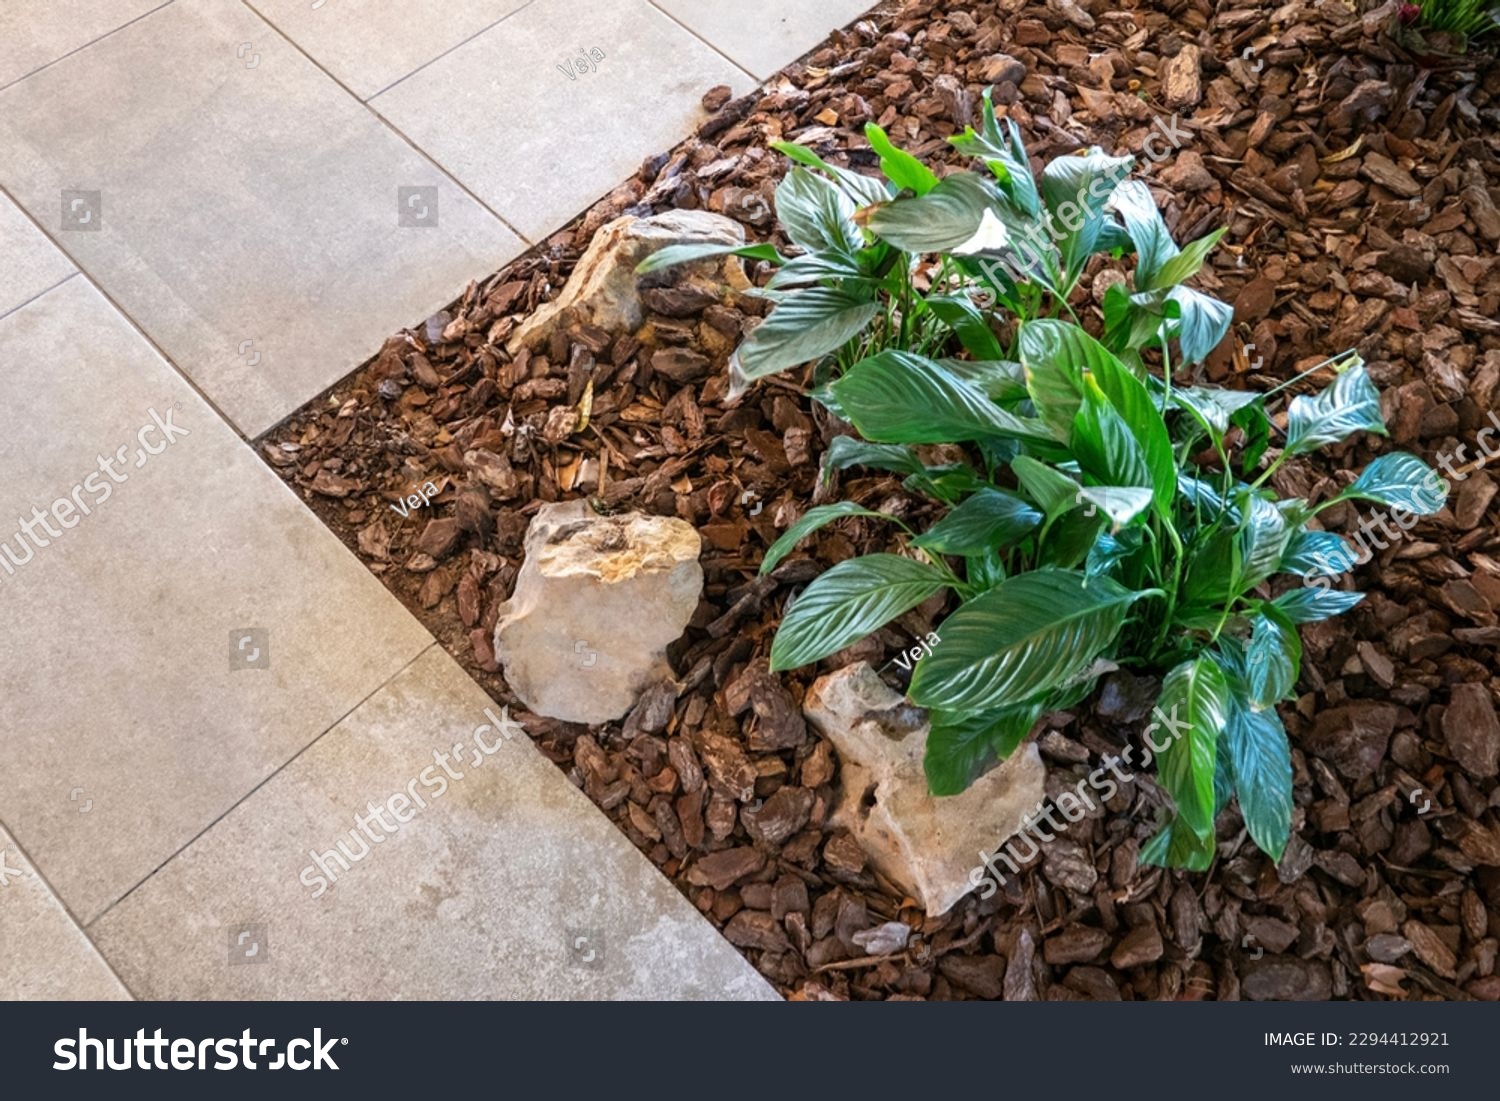 Green plant mulched with natural brown bark mulch and decorative stones near pedestrian pathway. Top view. Modern gardening landscaping design #2294412921